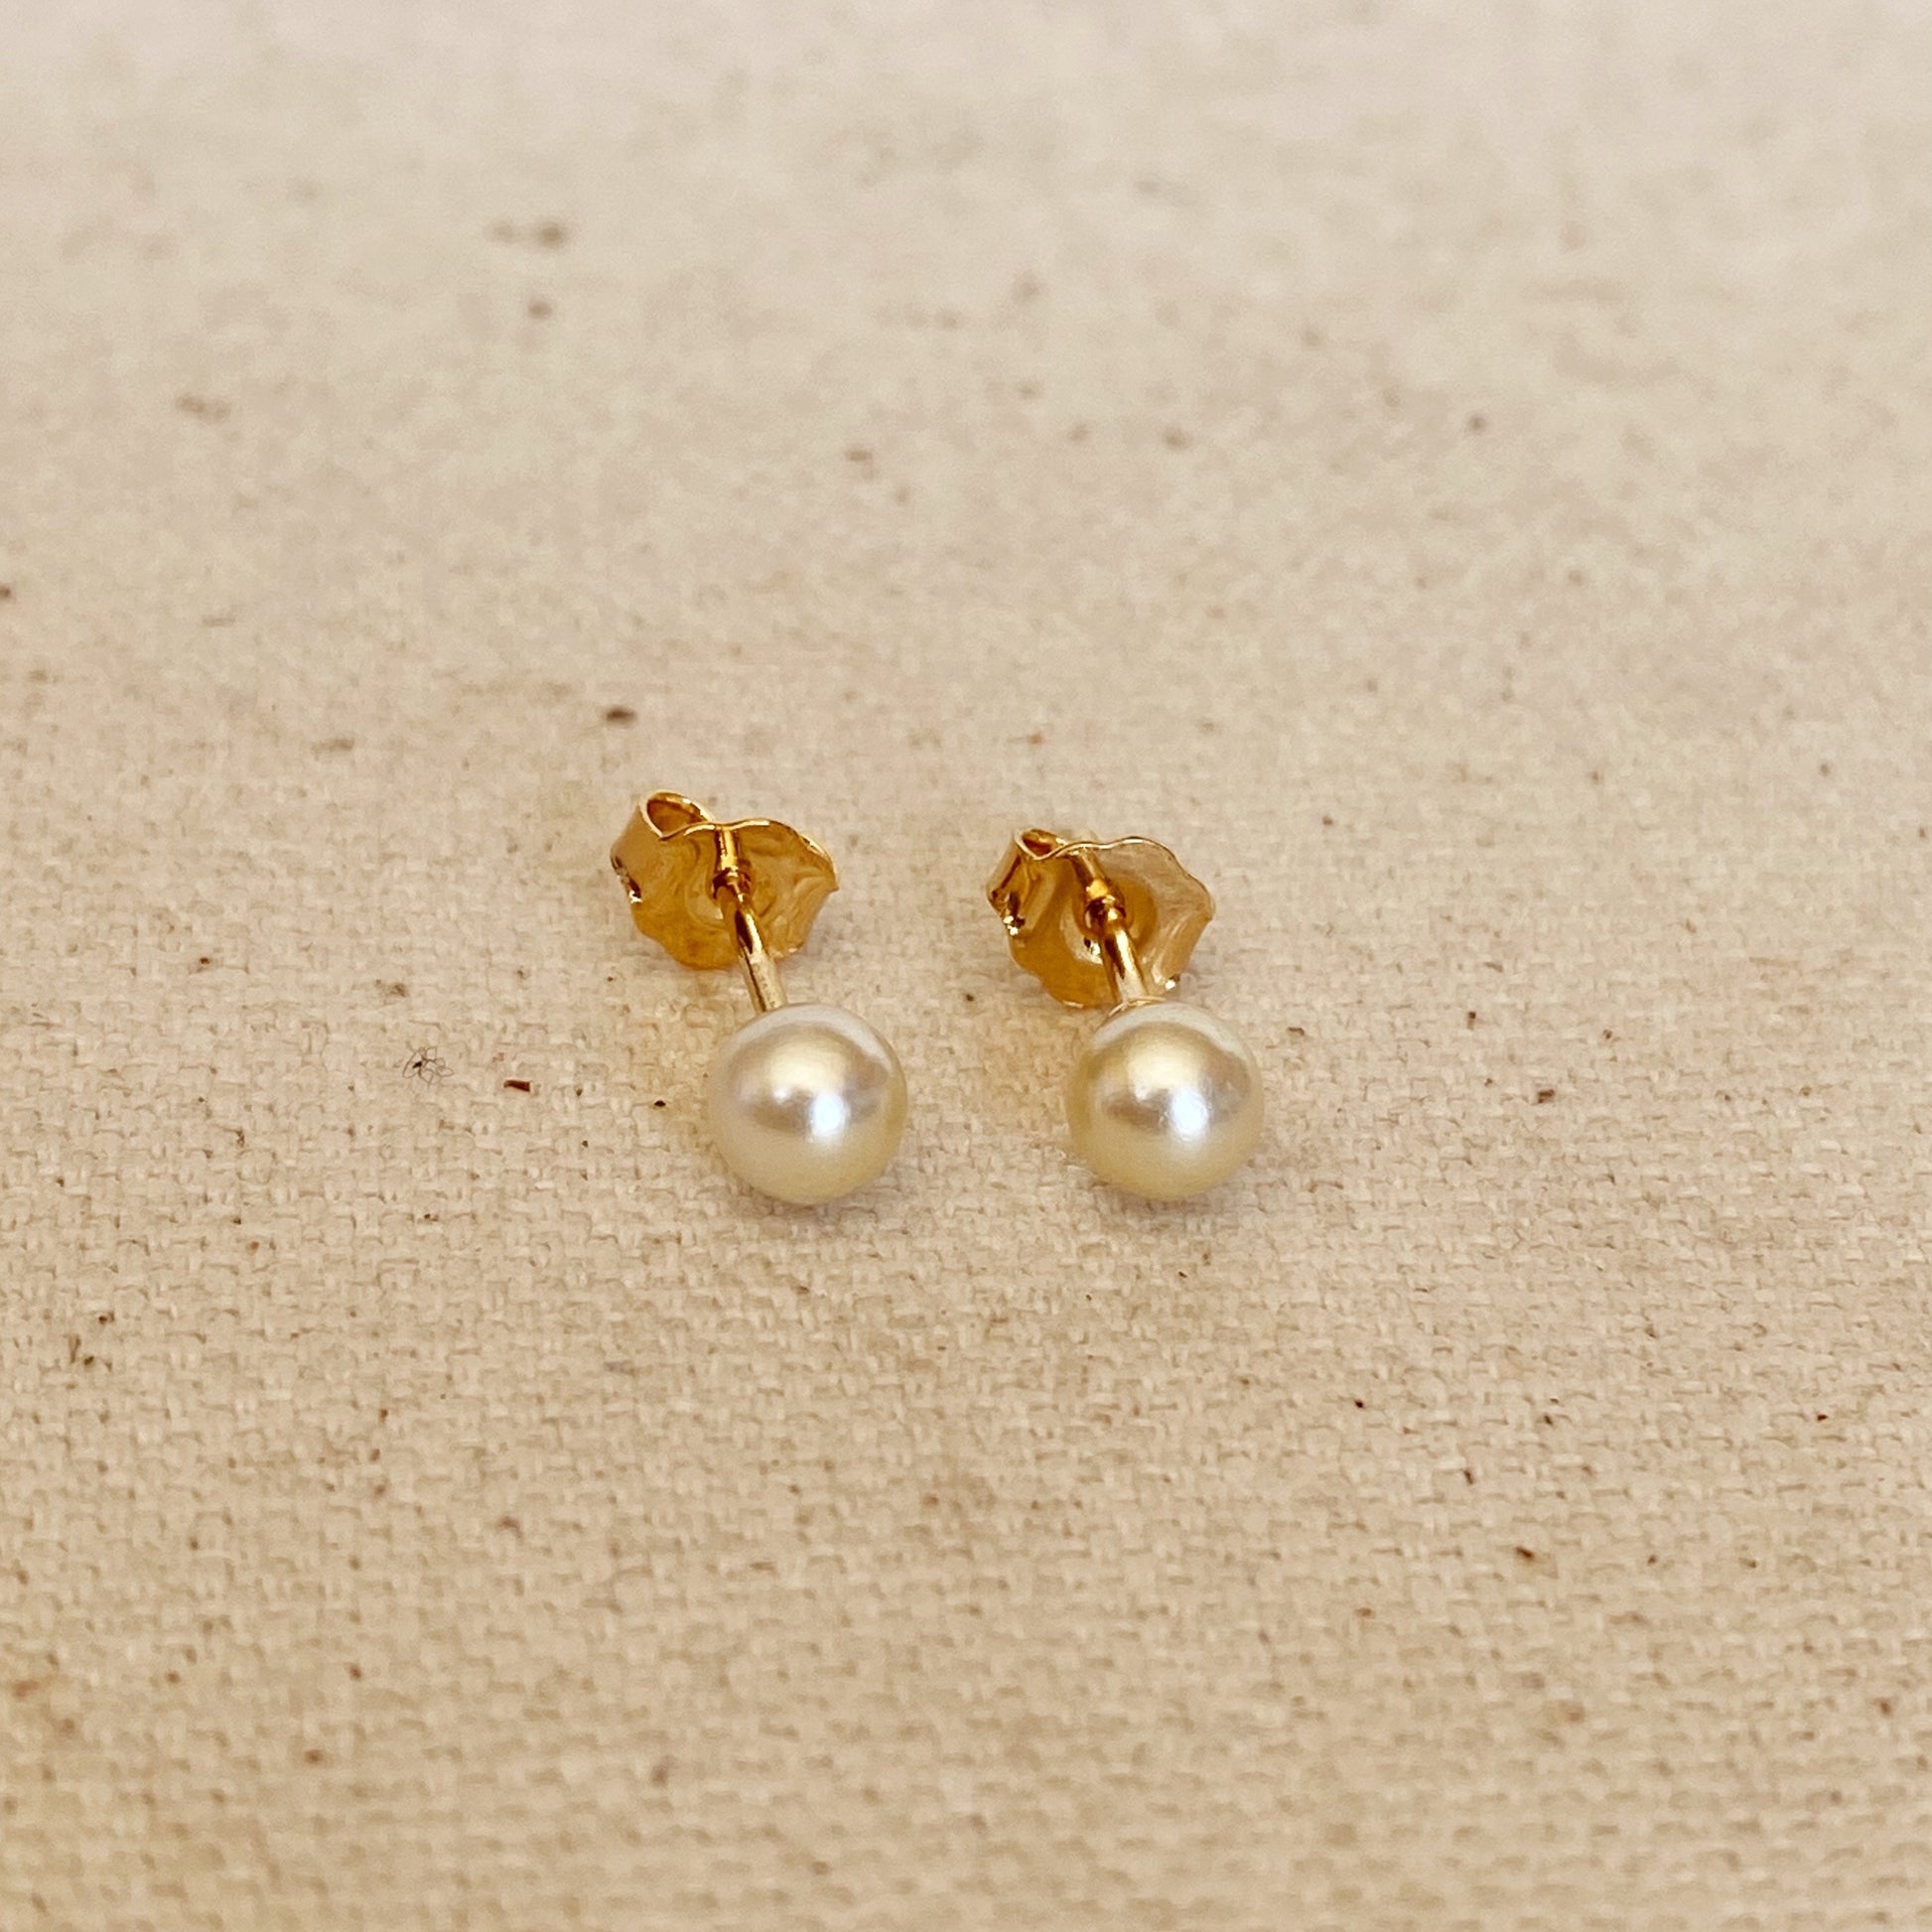 GoldFi 18k Gold Filled Simulated Pearl Stud